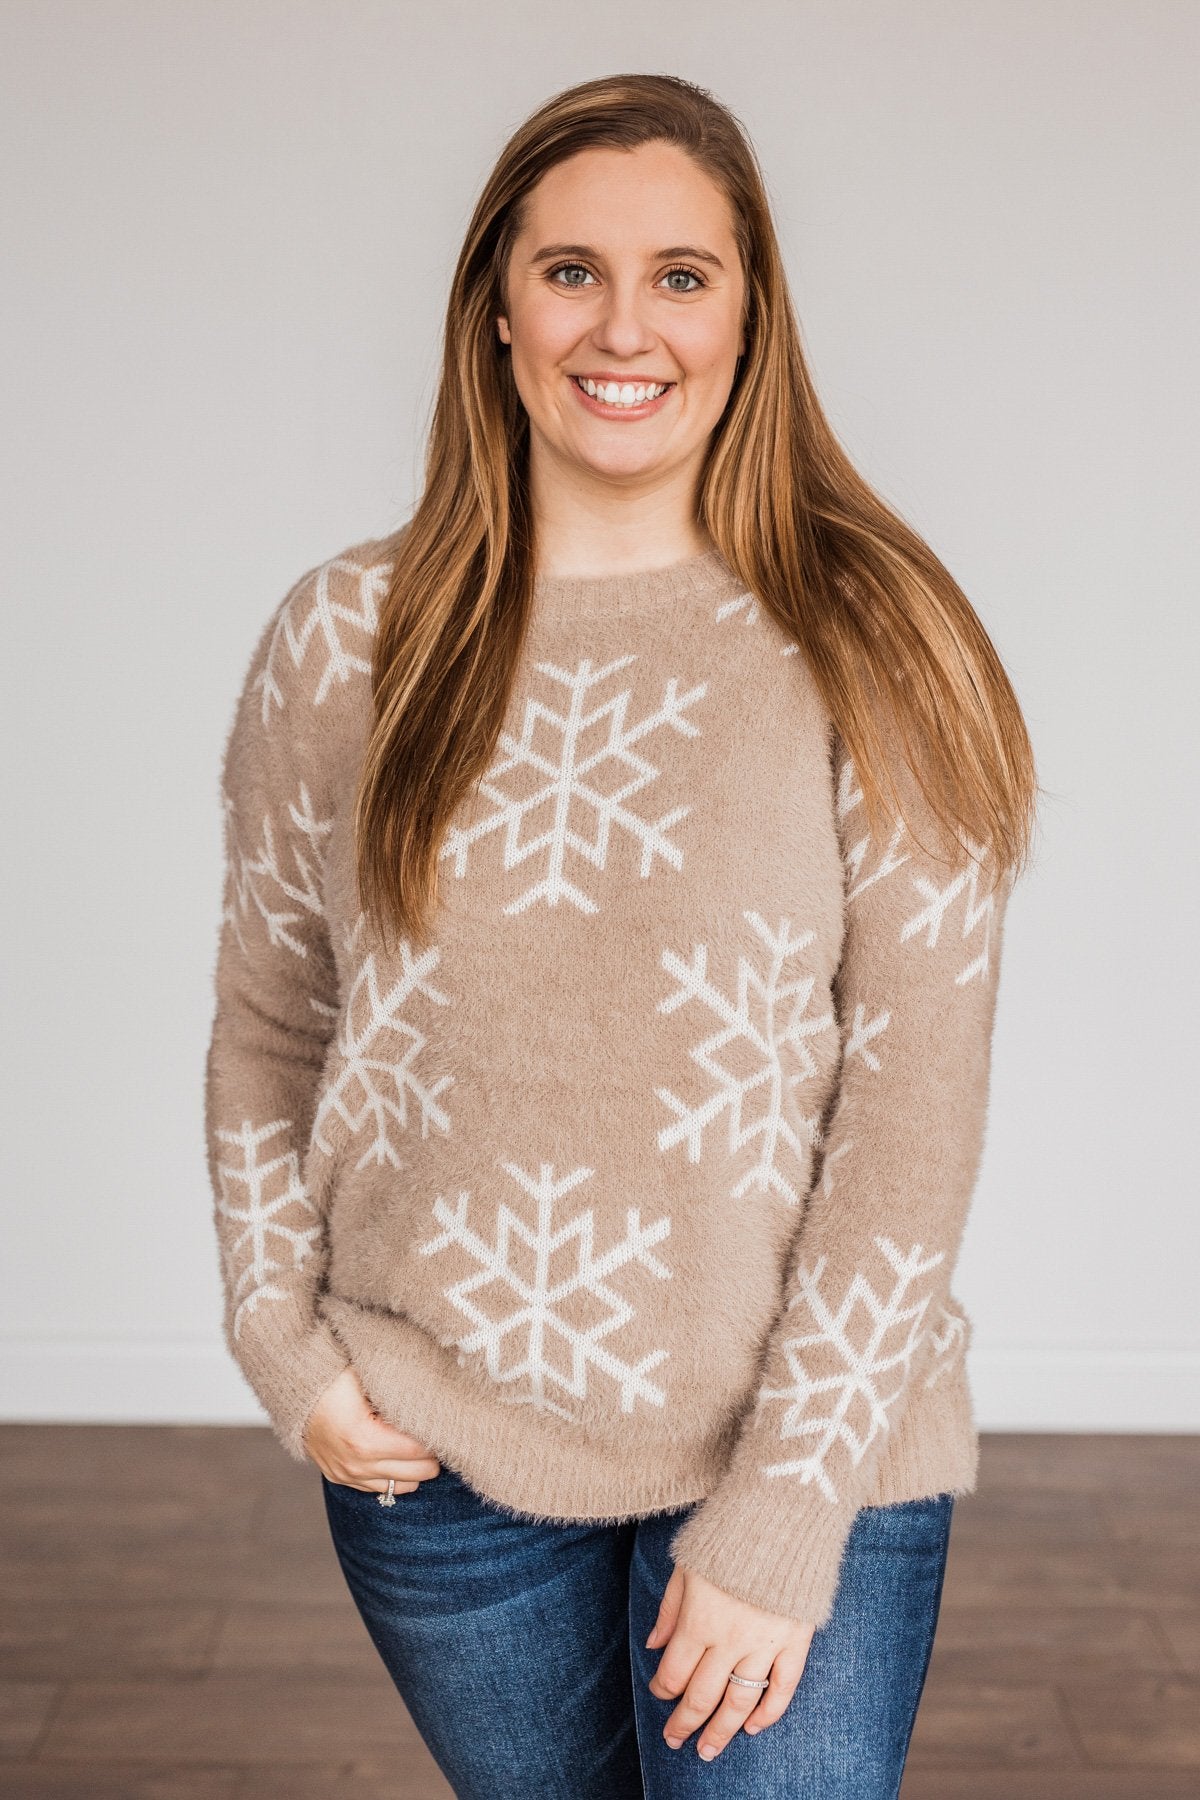 Falling Snowflakes Knit Sweater- Beige & Ivory